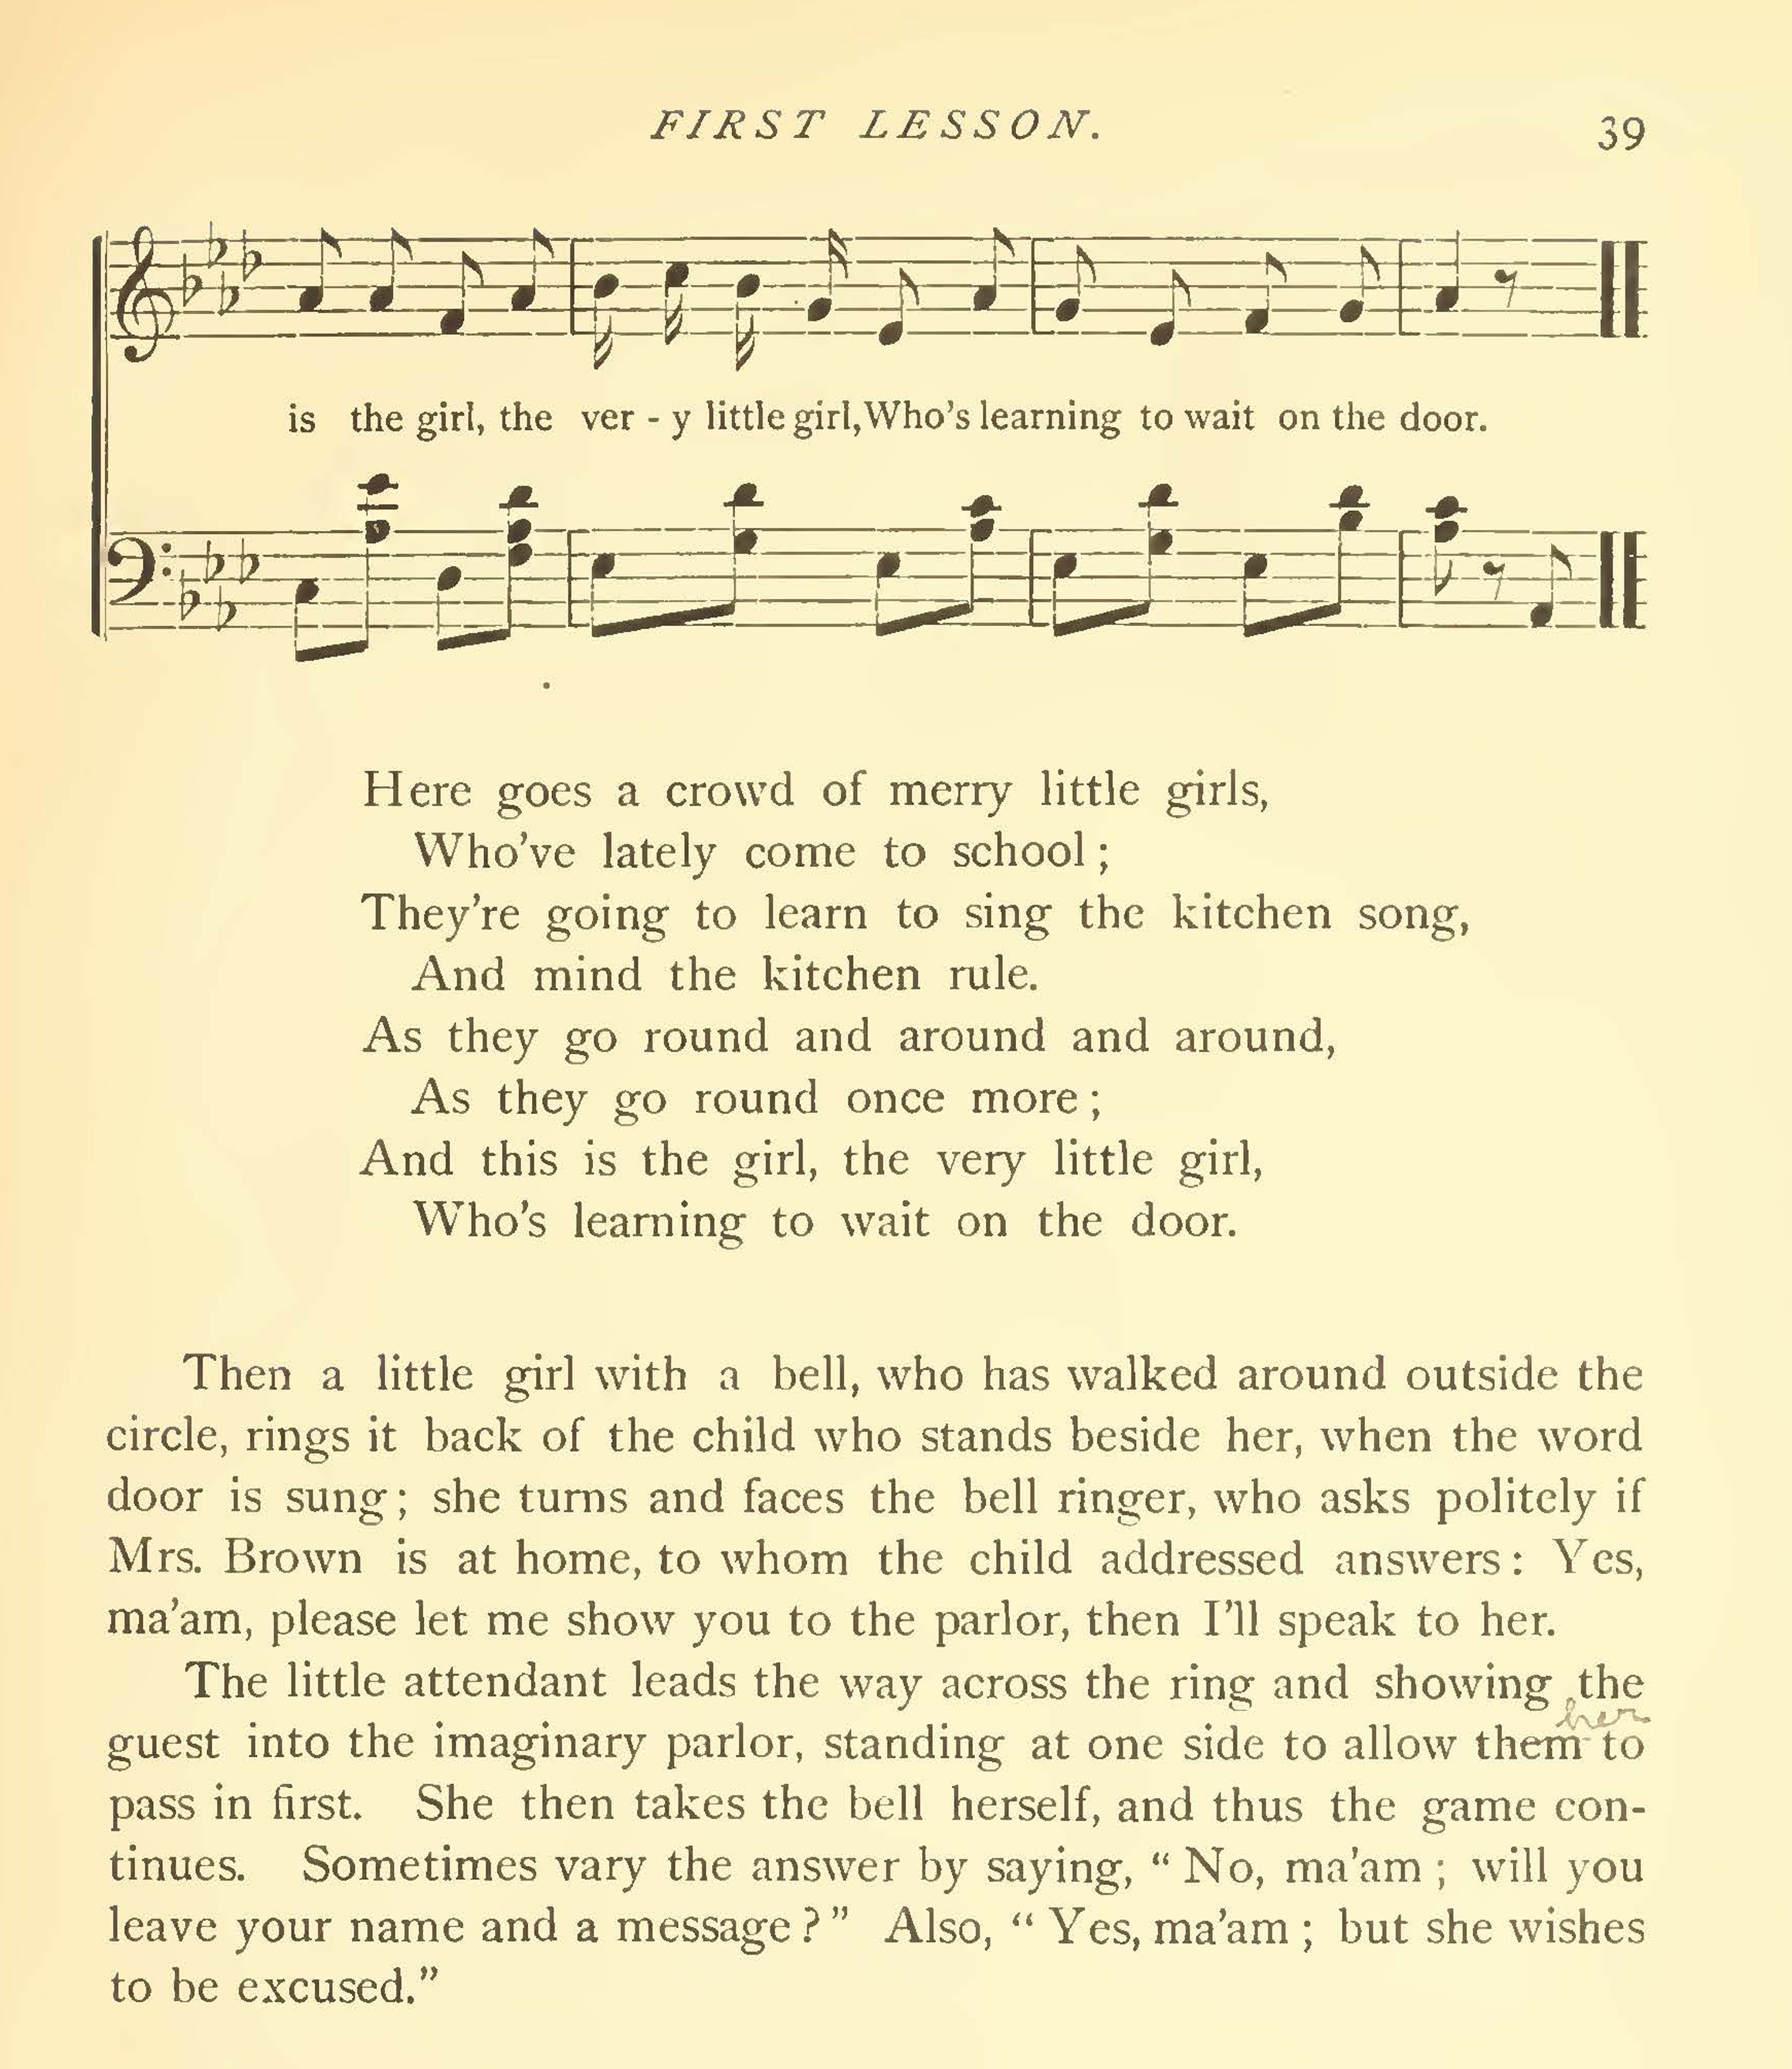 The text of a song and a lesson called "Waiting on the Door"